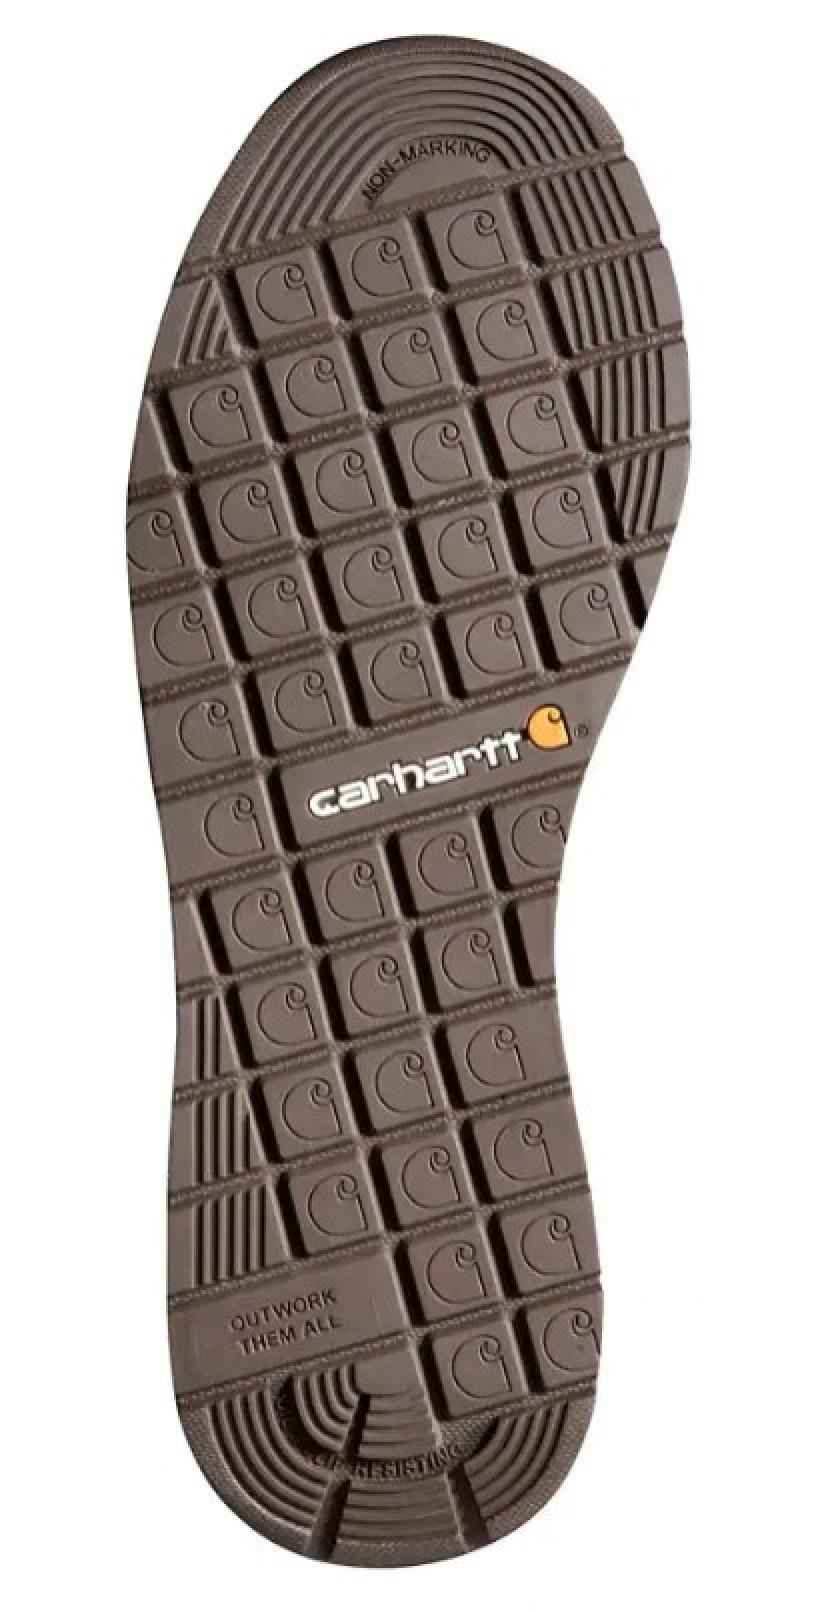 Carhartt Non-Safety Toe Oxford Shoe Outer Sole